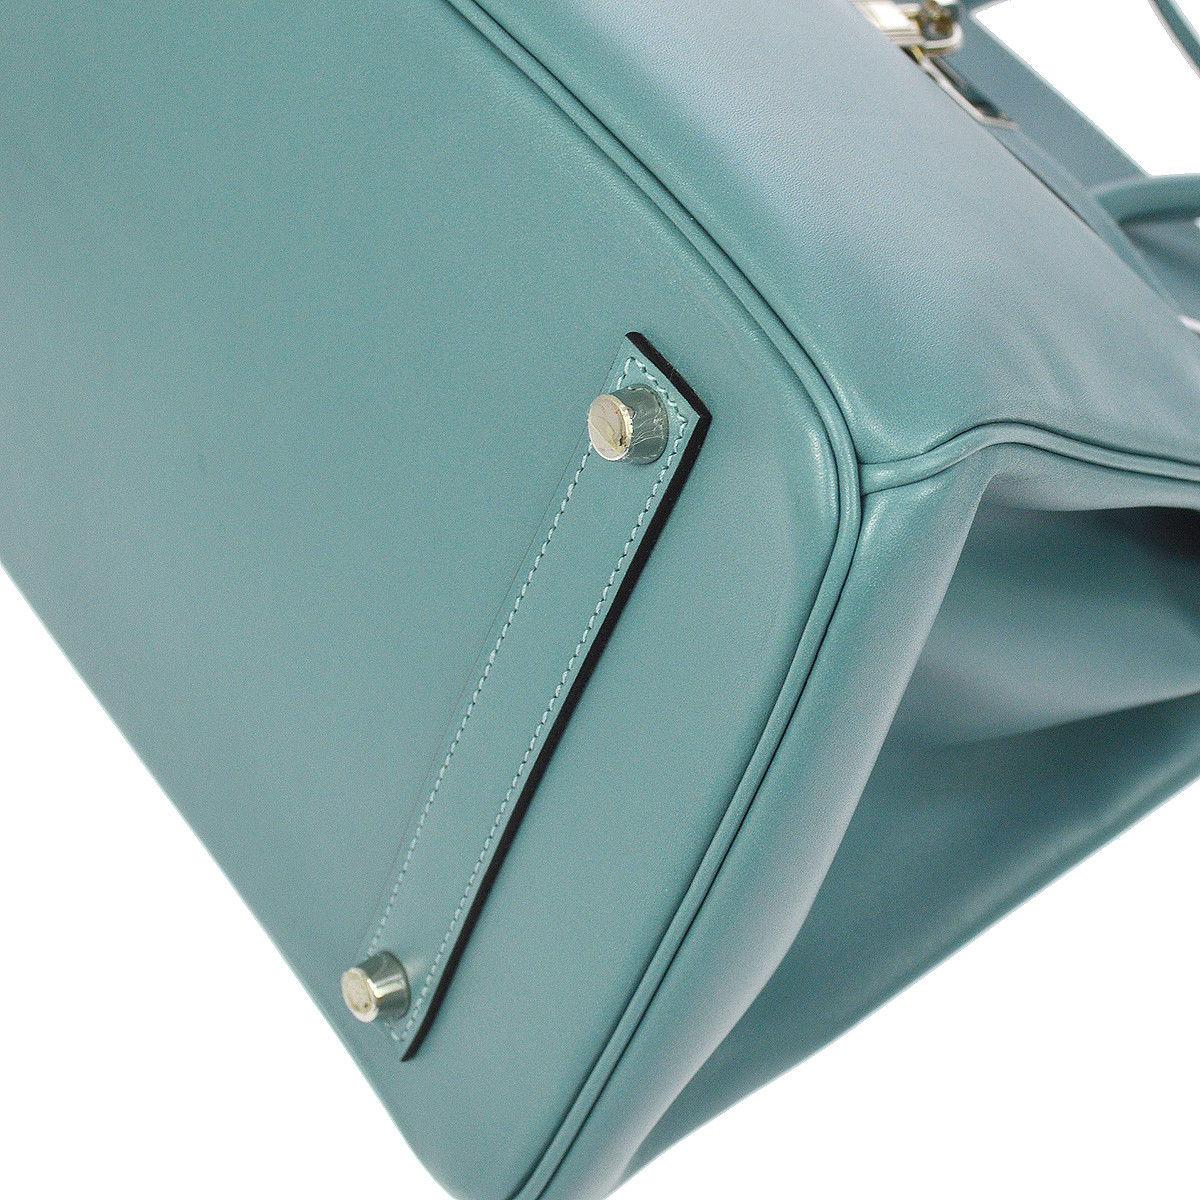 Hermes Birkin 35 Tiffany Blue Leather Top Handle Satchel Travel Shoulder Bag In Good Condition In Chicago, IL